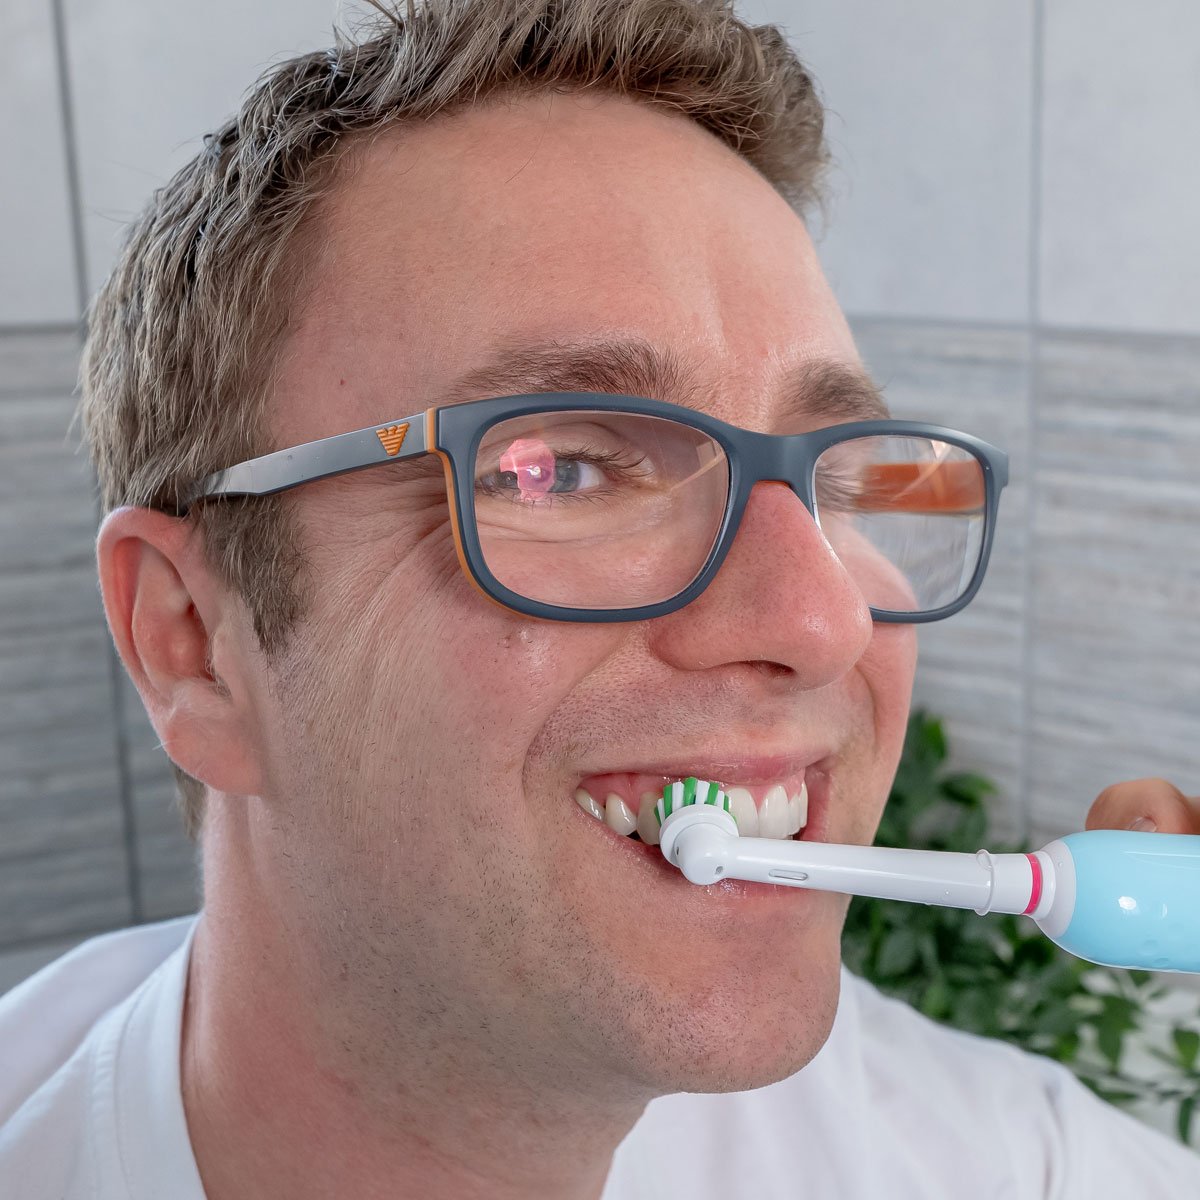 Oral-B Pro 1 electric toothbrush in use in the mouth